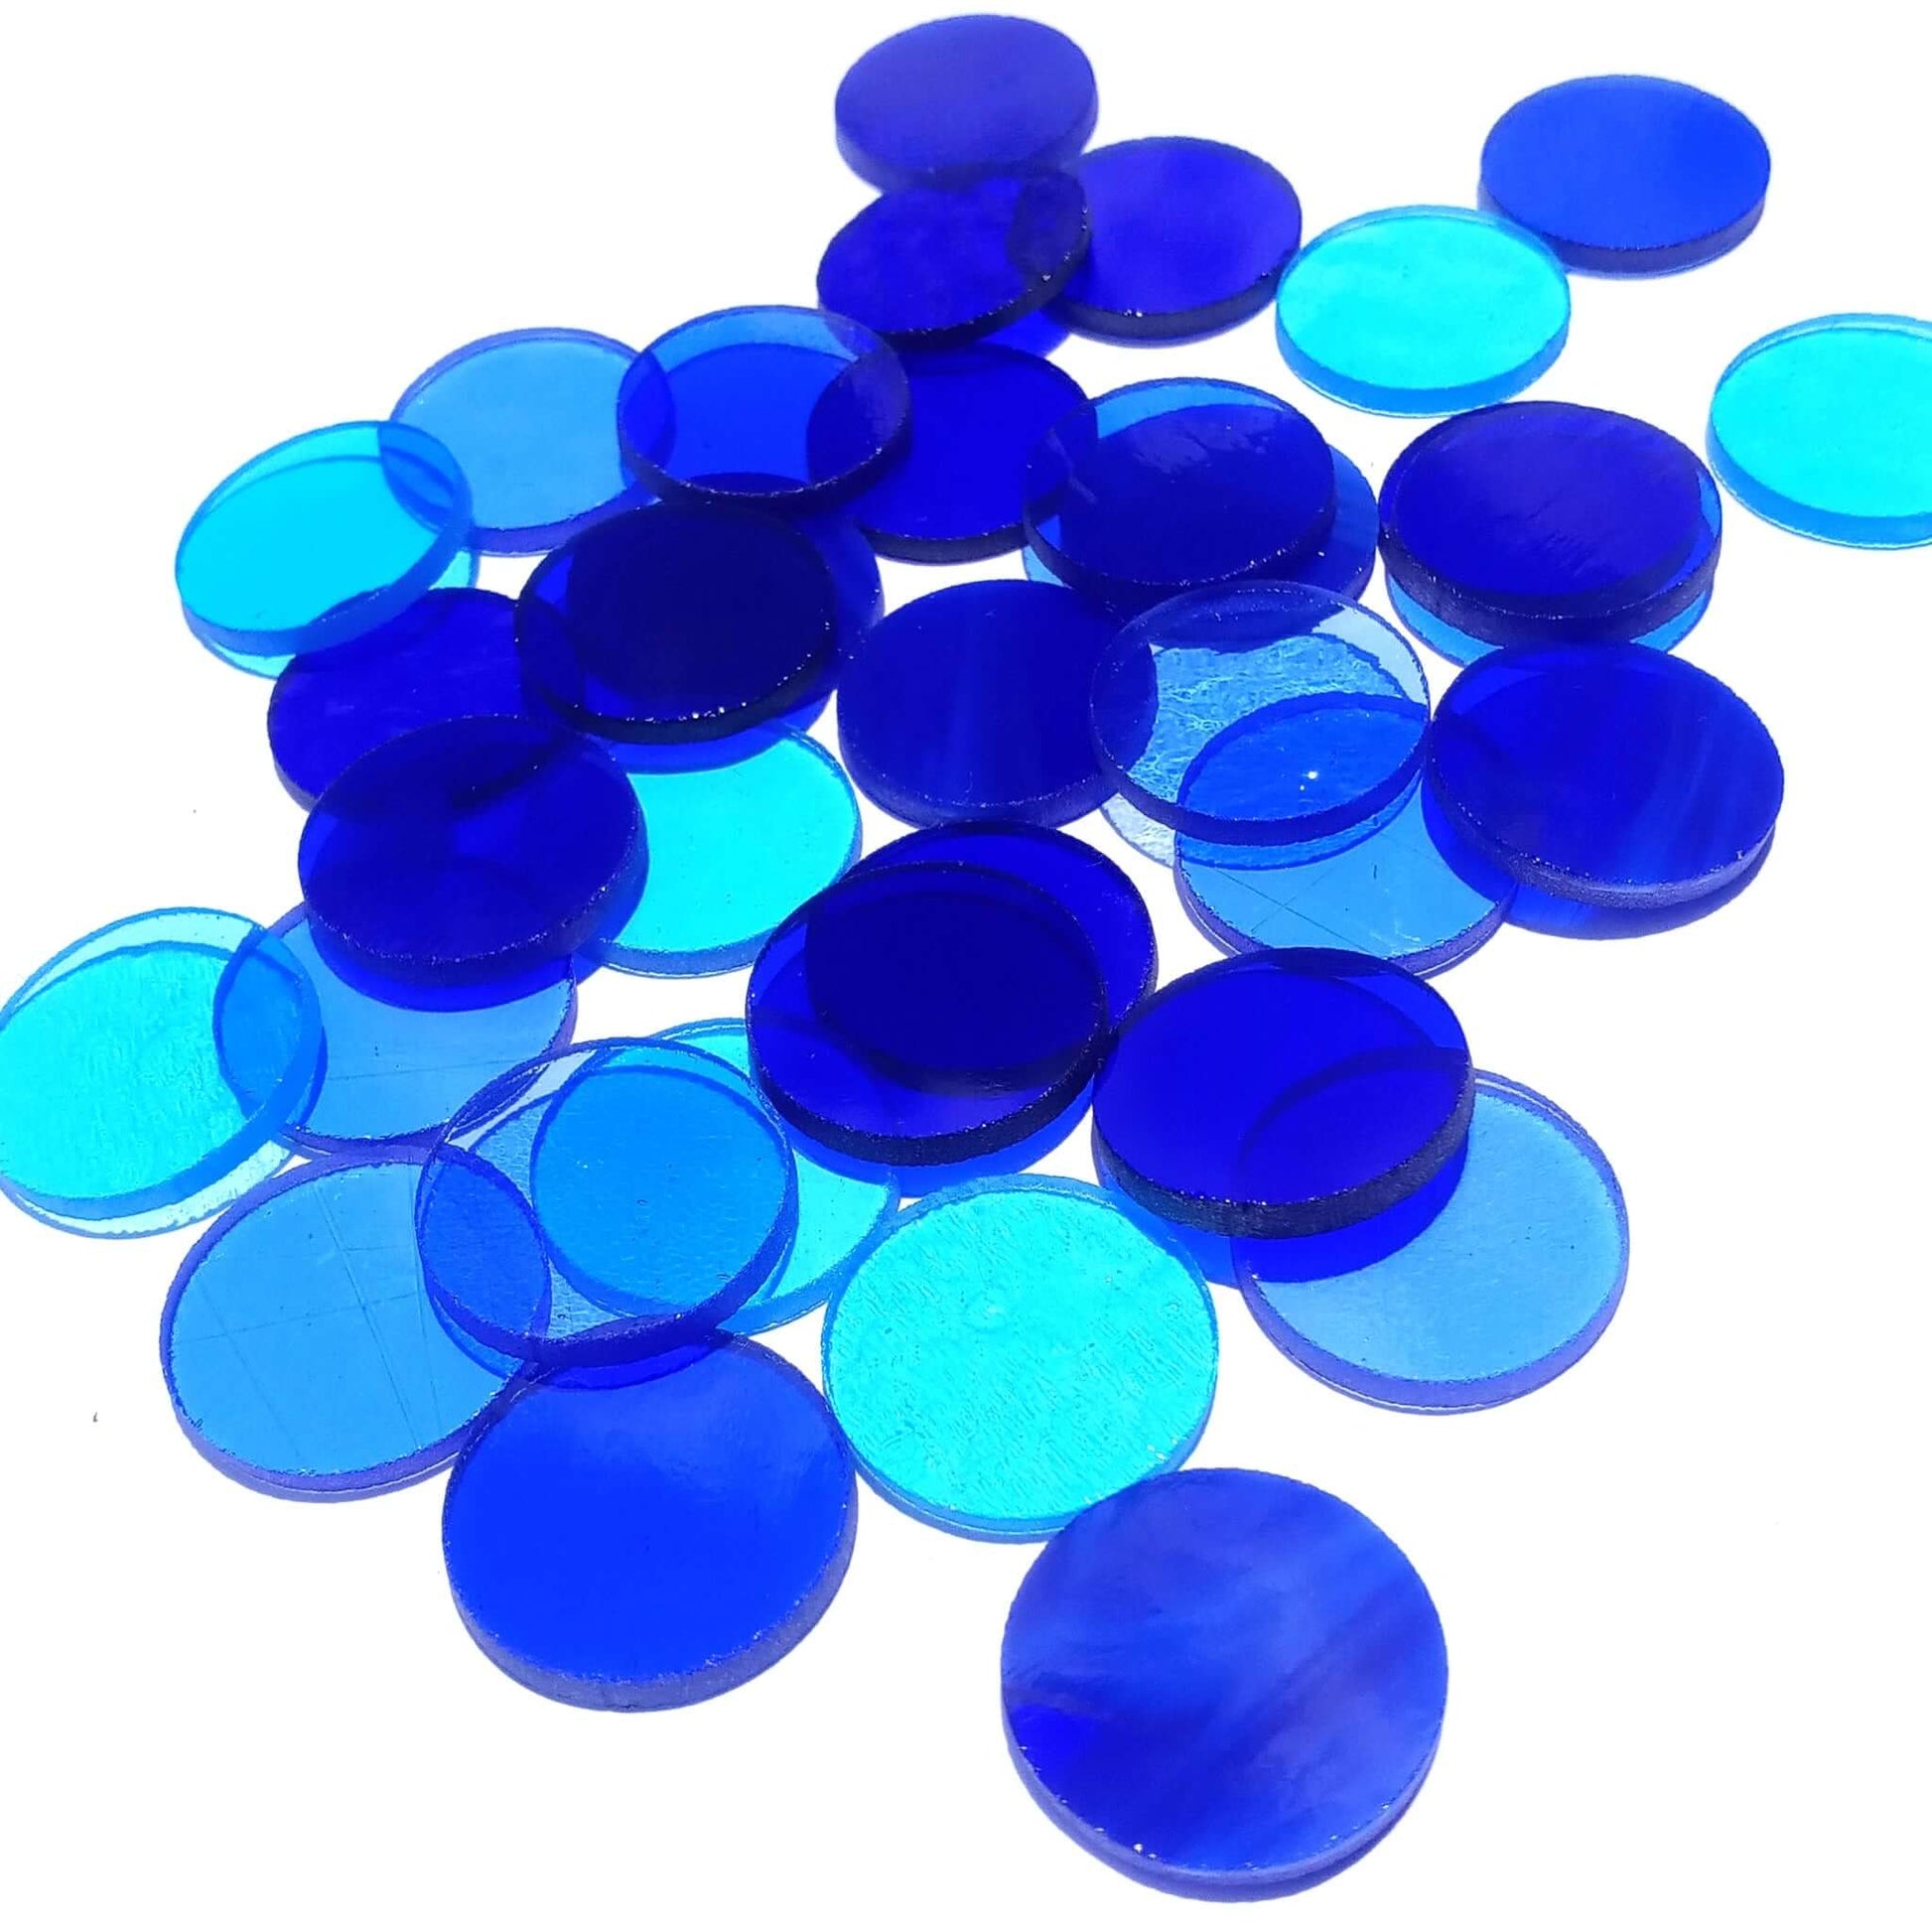 Blue Precut Stained Glass Circles, 1" Blue Glass Circles for Mosaics, Jewelry, Stained Glass Art